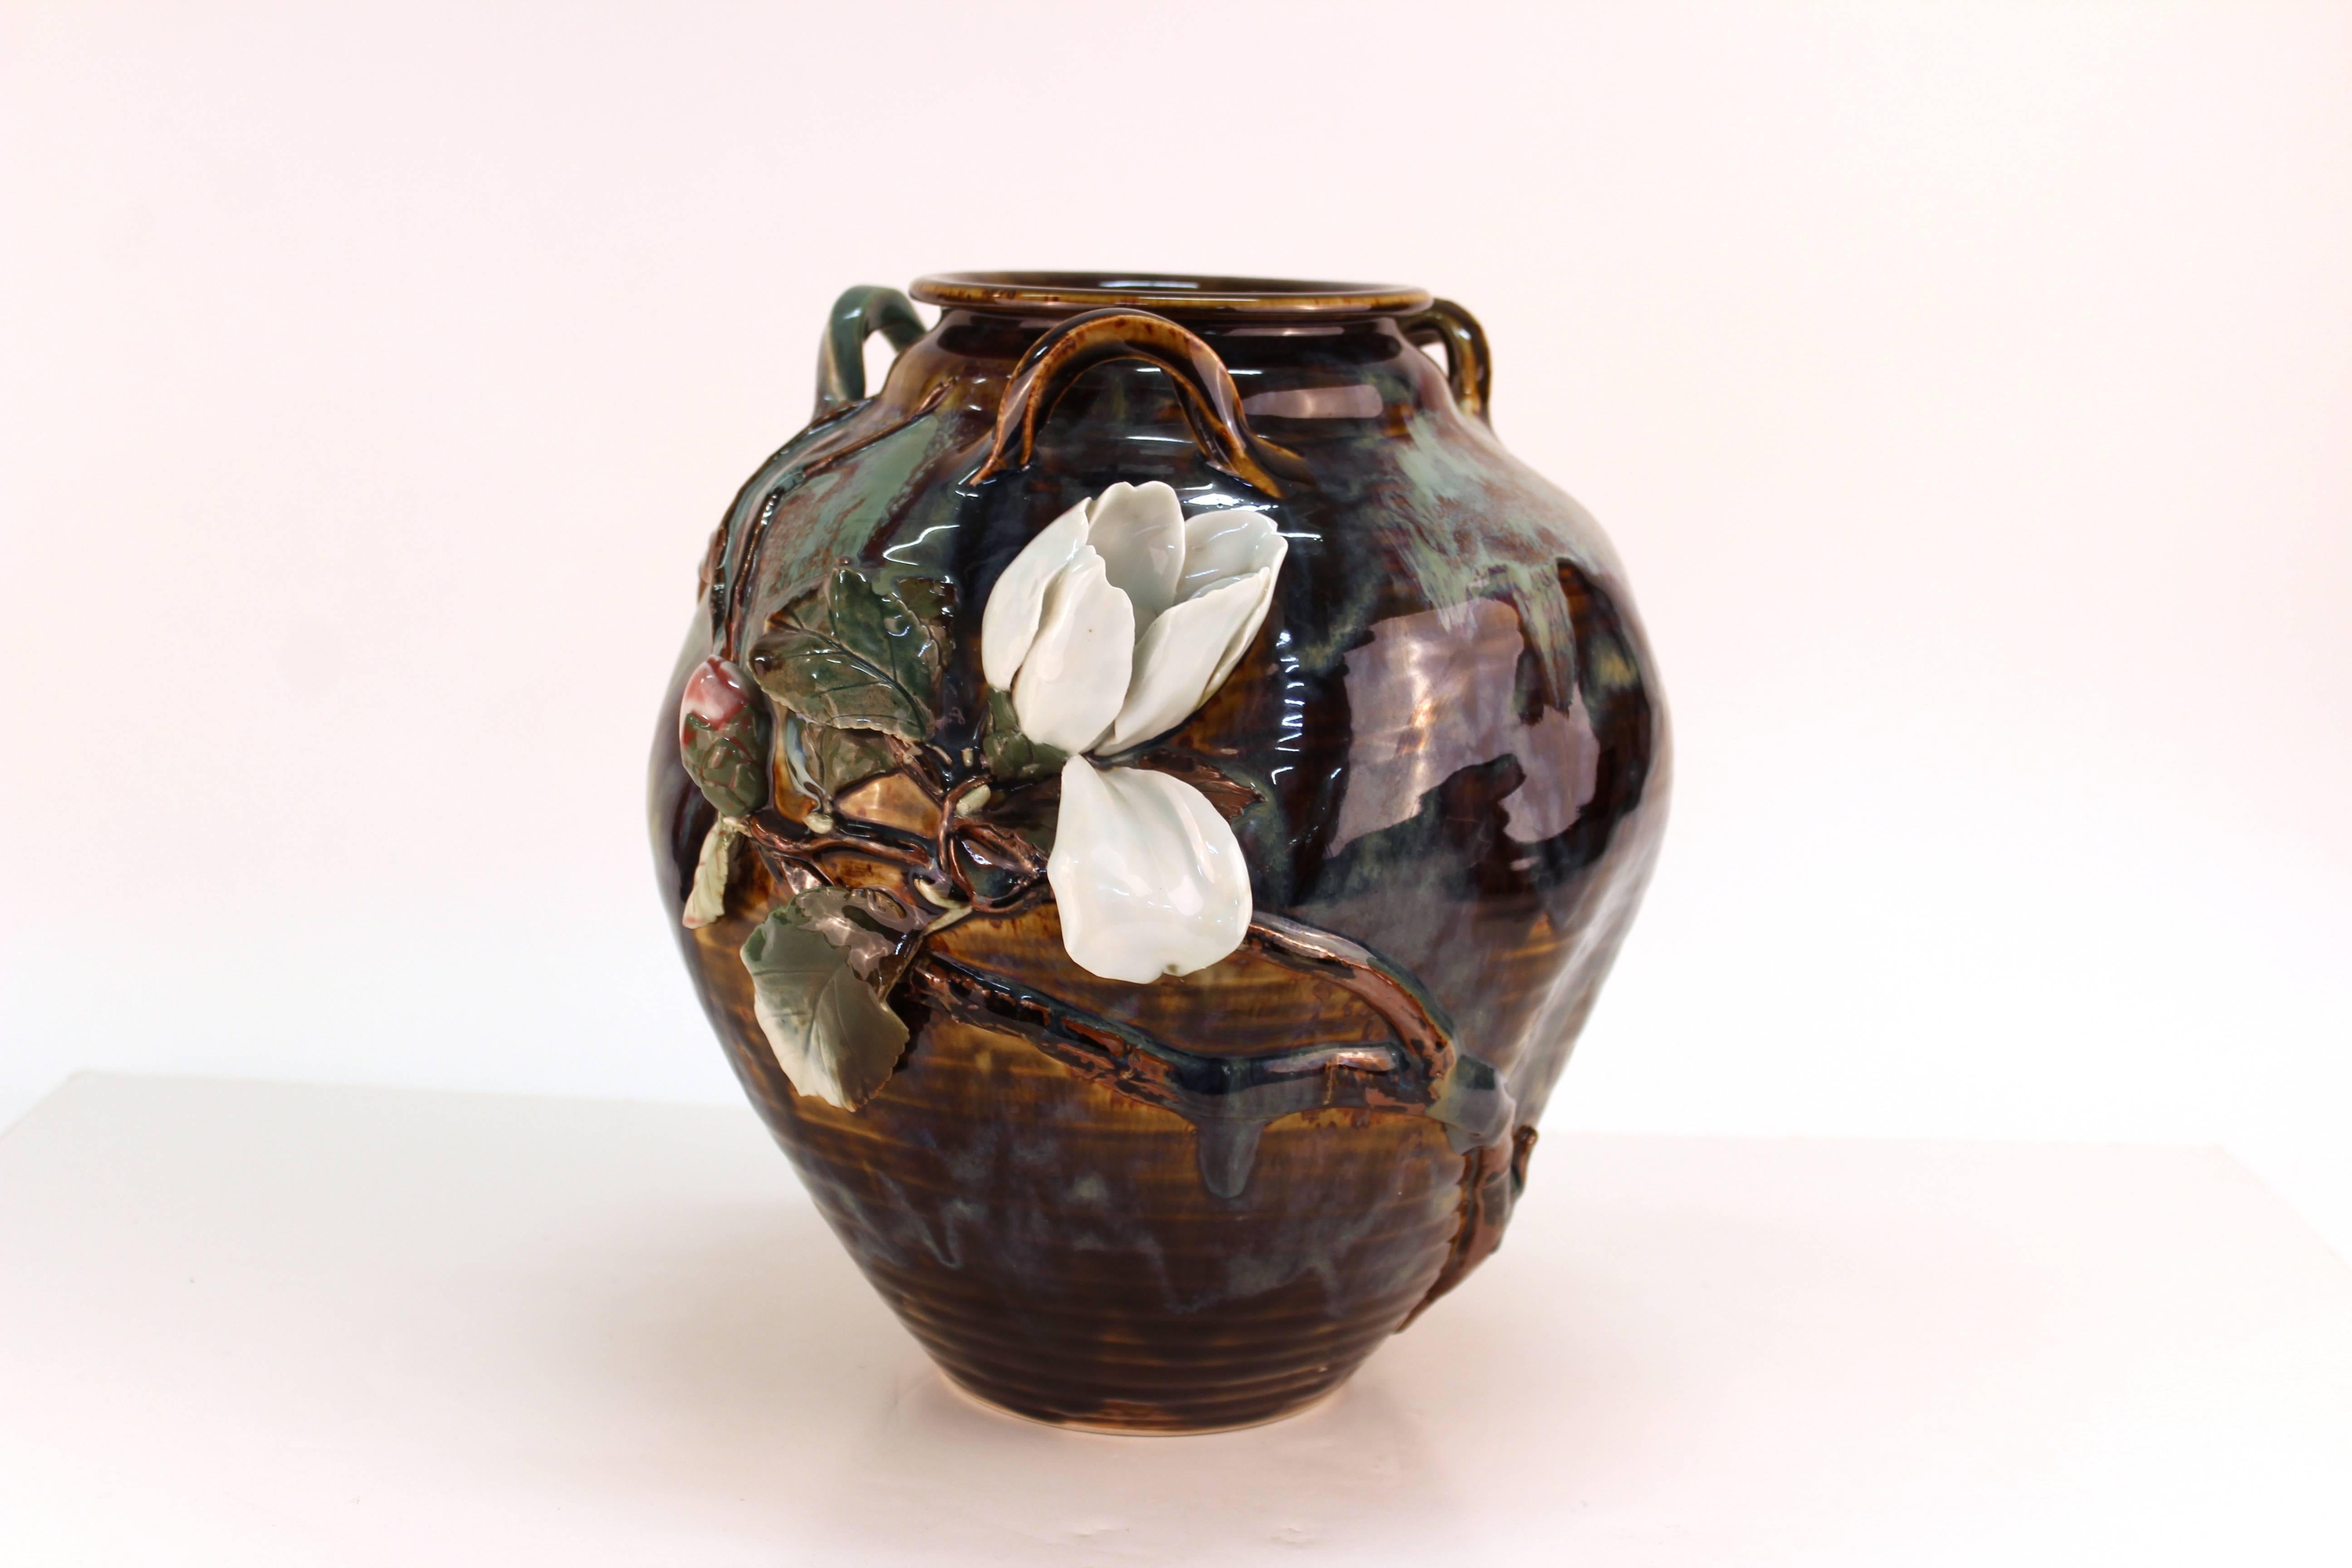 A vase in glazed ceramic with decorative raised flowers. The piece was manufactured in Japan and dates to the period of 1900-1920. In great vintage condition.